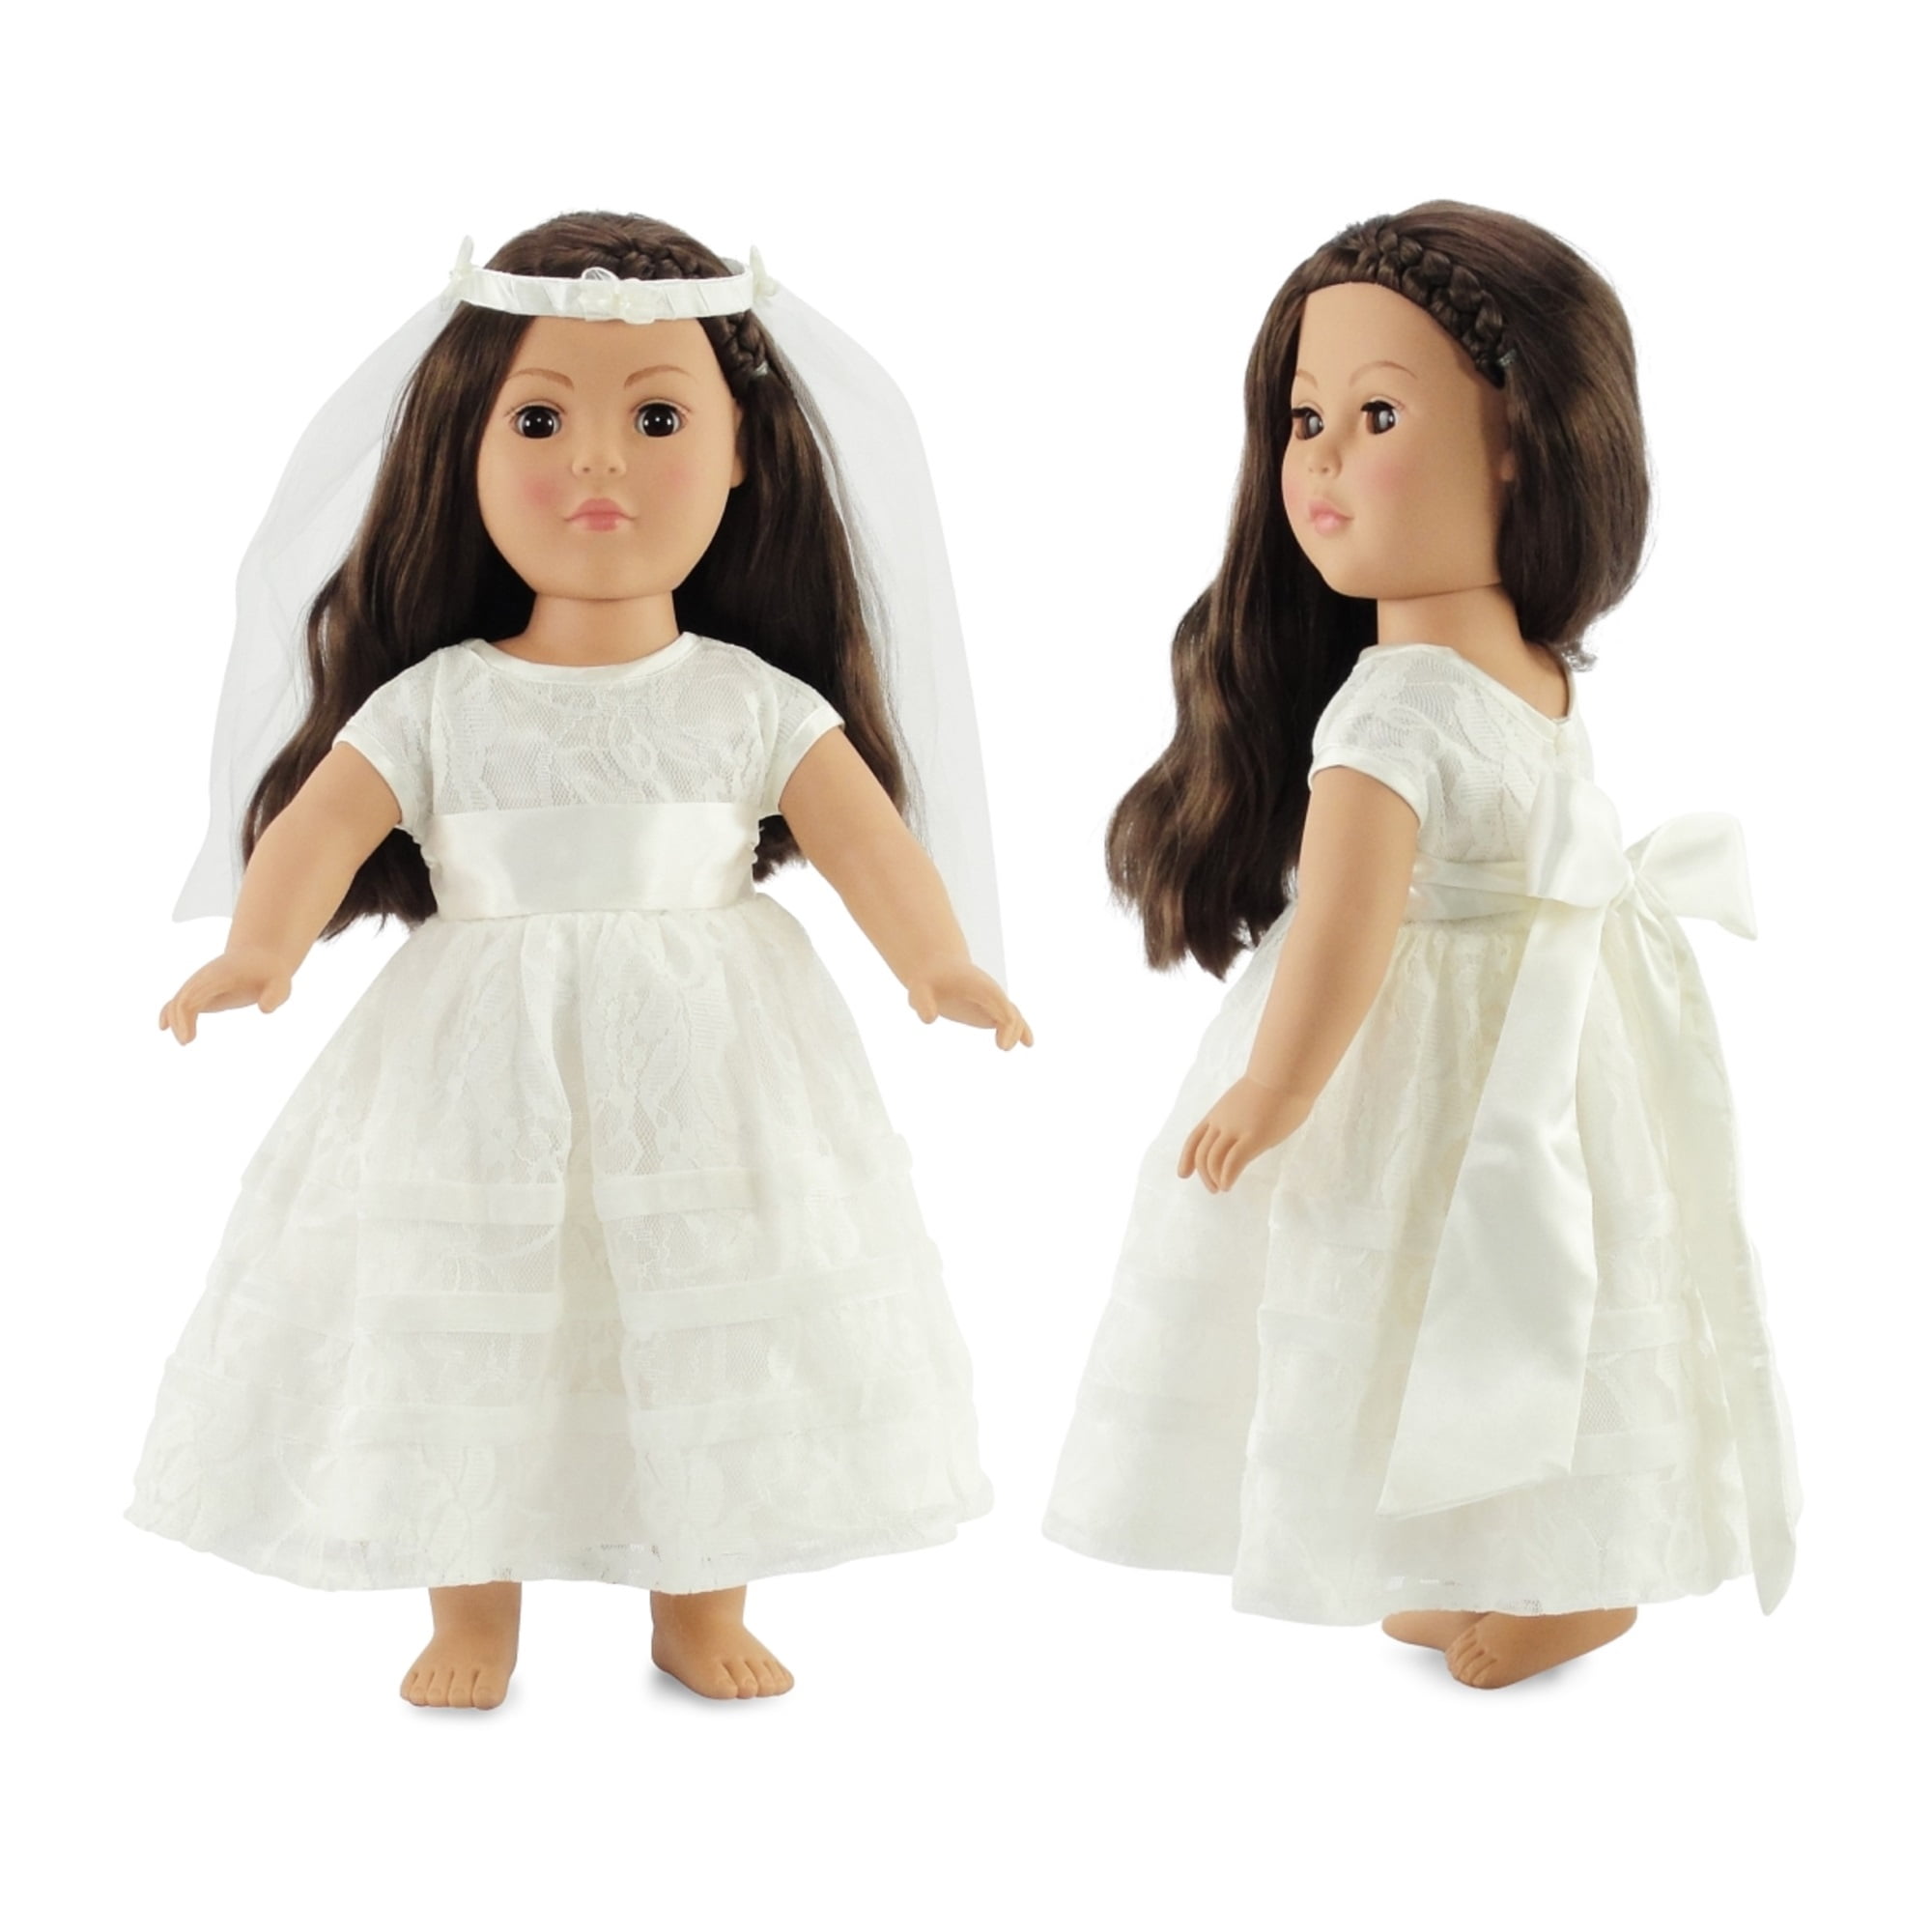 18" American Girl/Our Generation Dolls Clothes Wedding Dress with Veil!